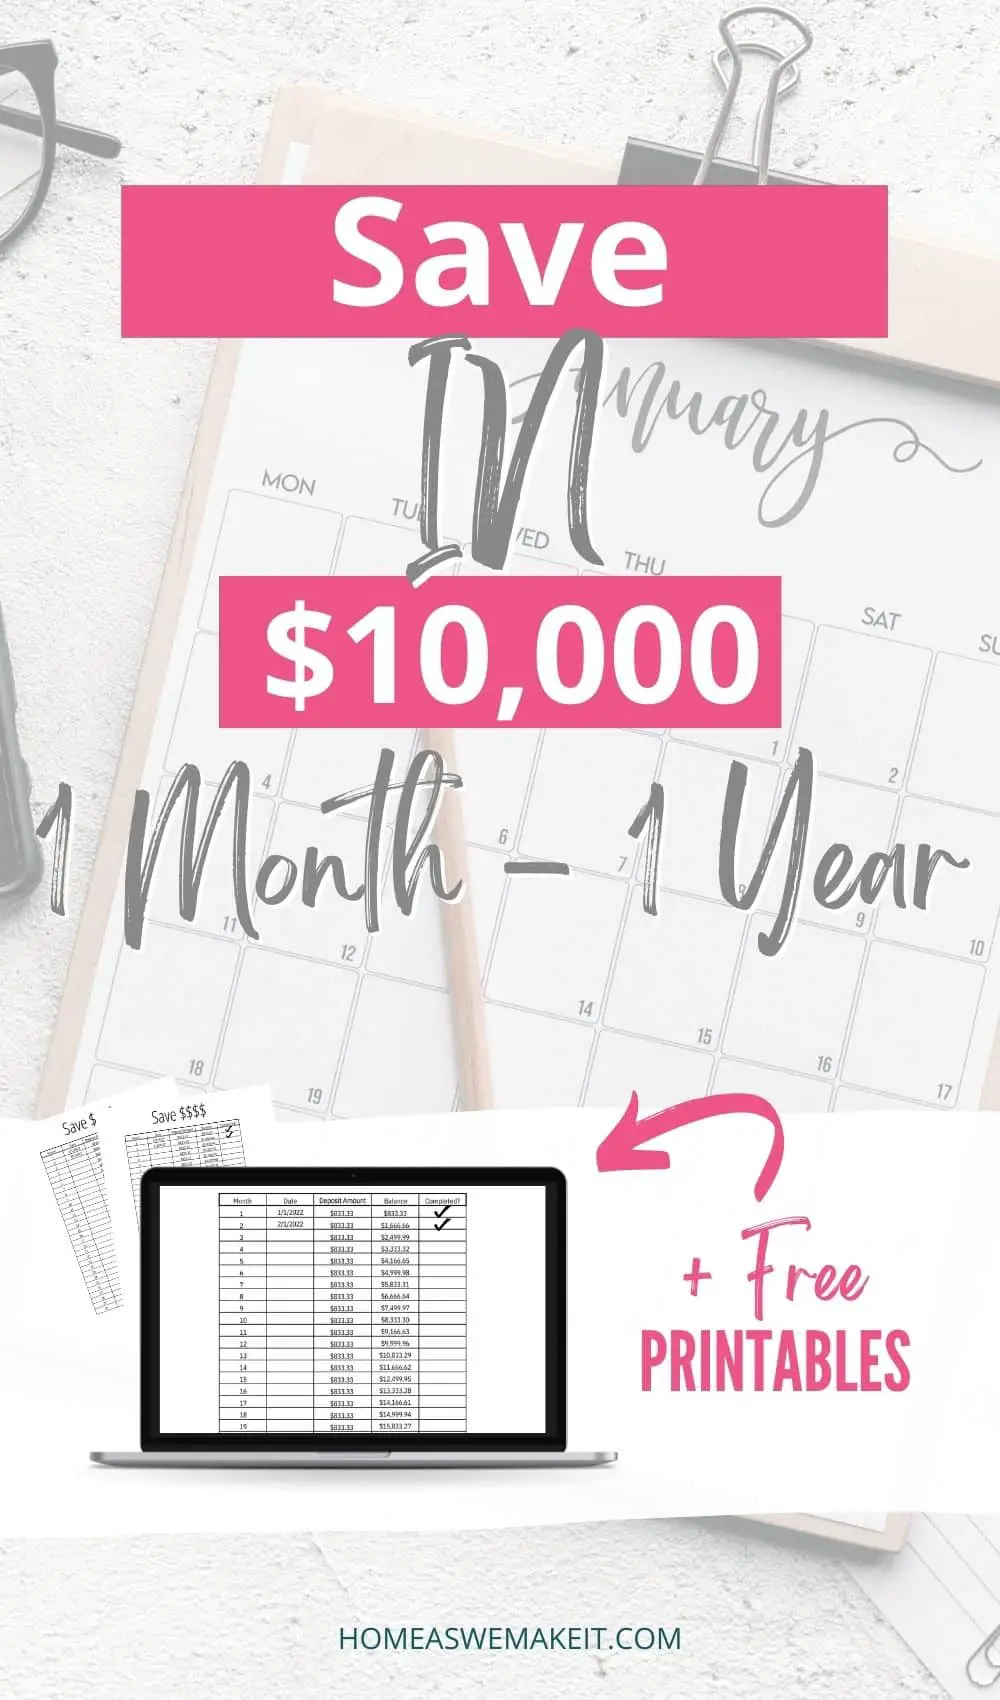 How to Save $10,000 With Weekly and Biweekly Deposit Charts